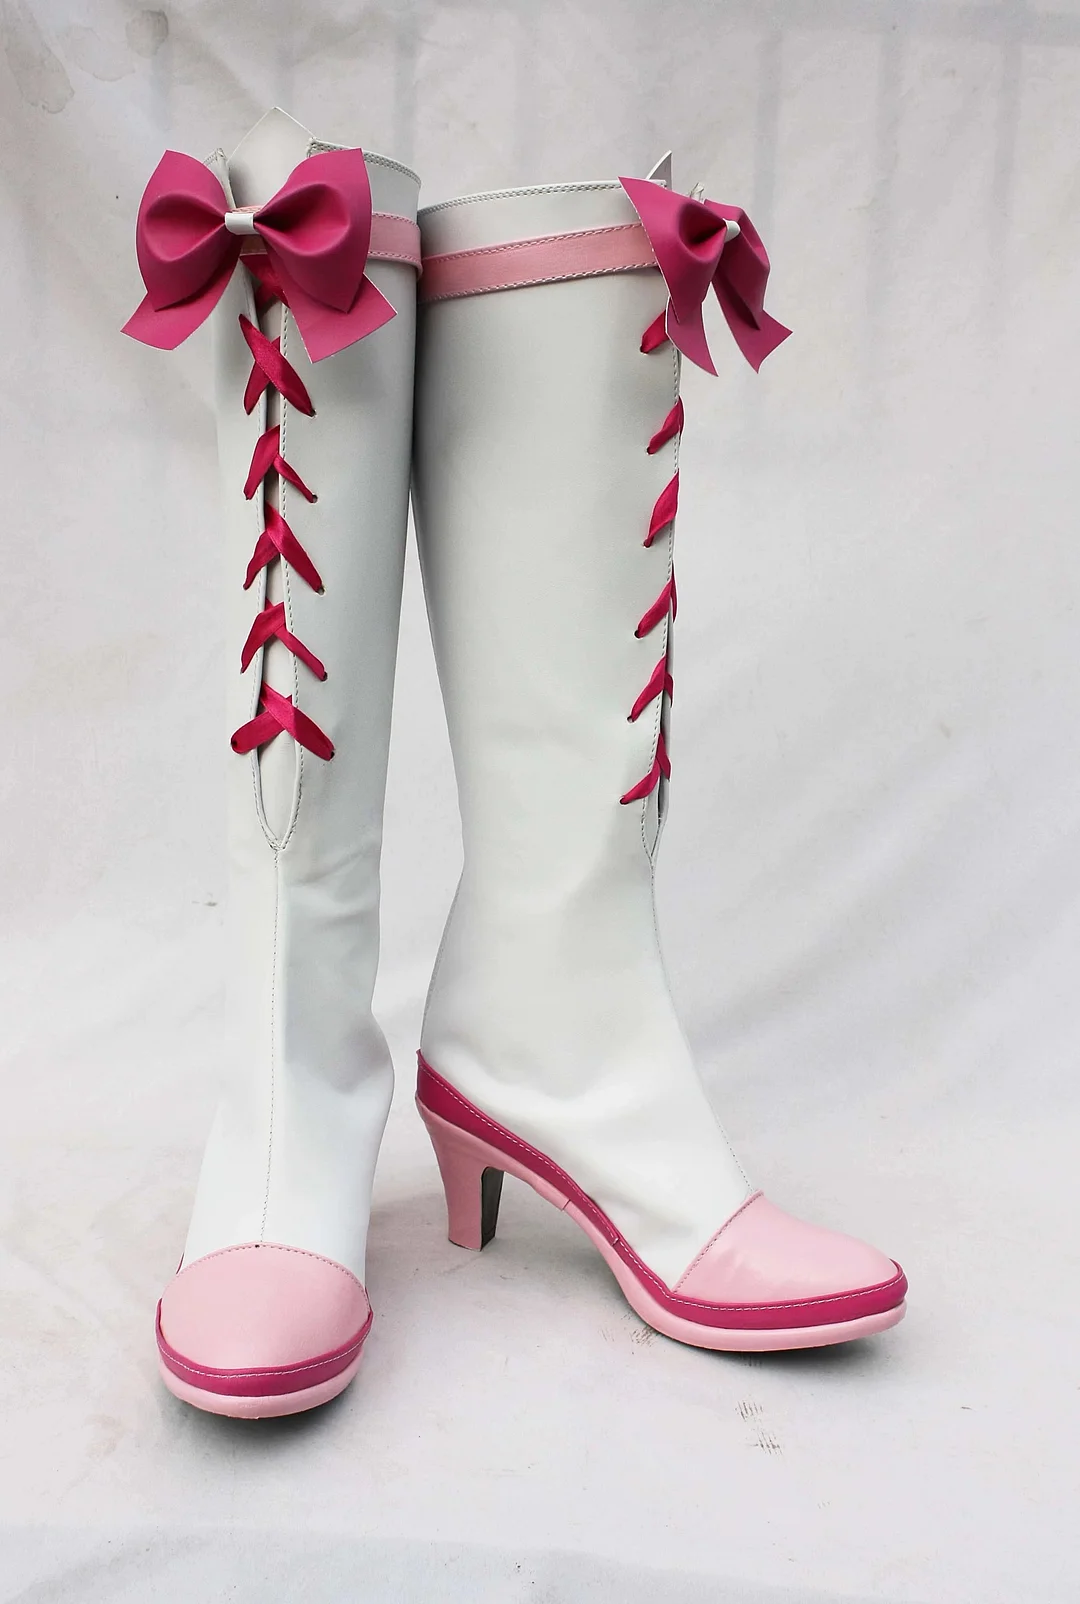 Smile Precure Pretty Cure Minamino Played Cosplay Boots Shoes